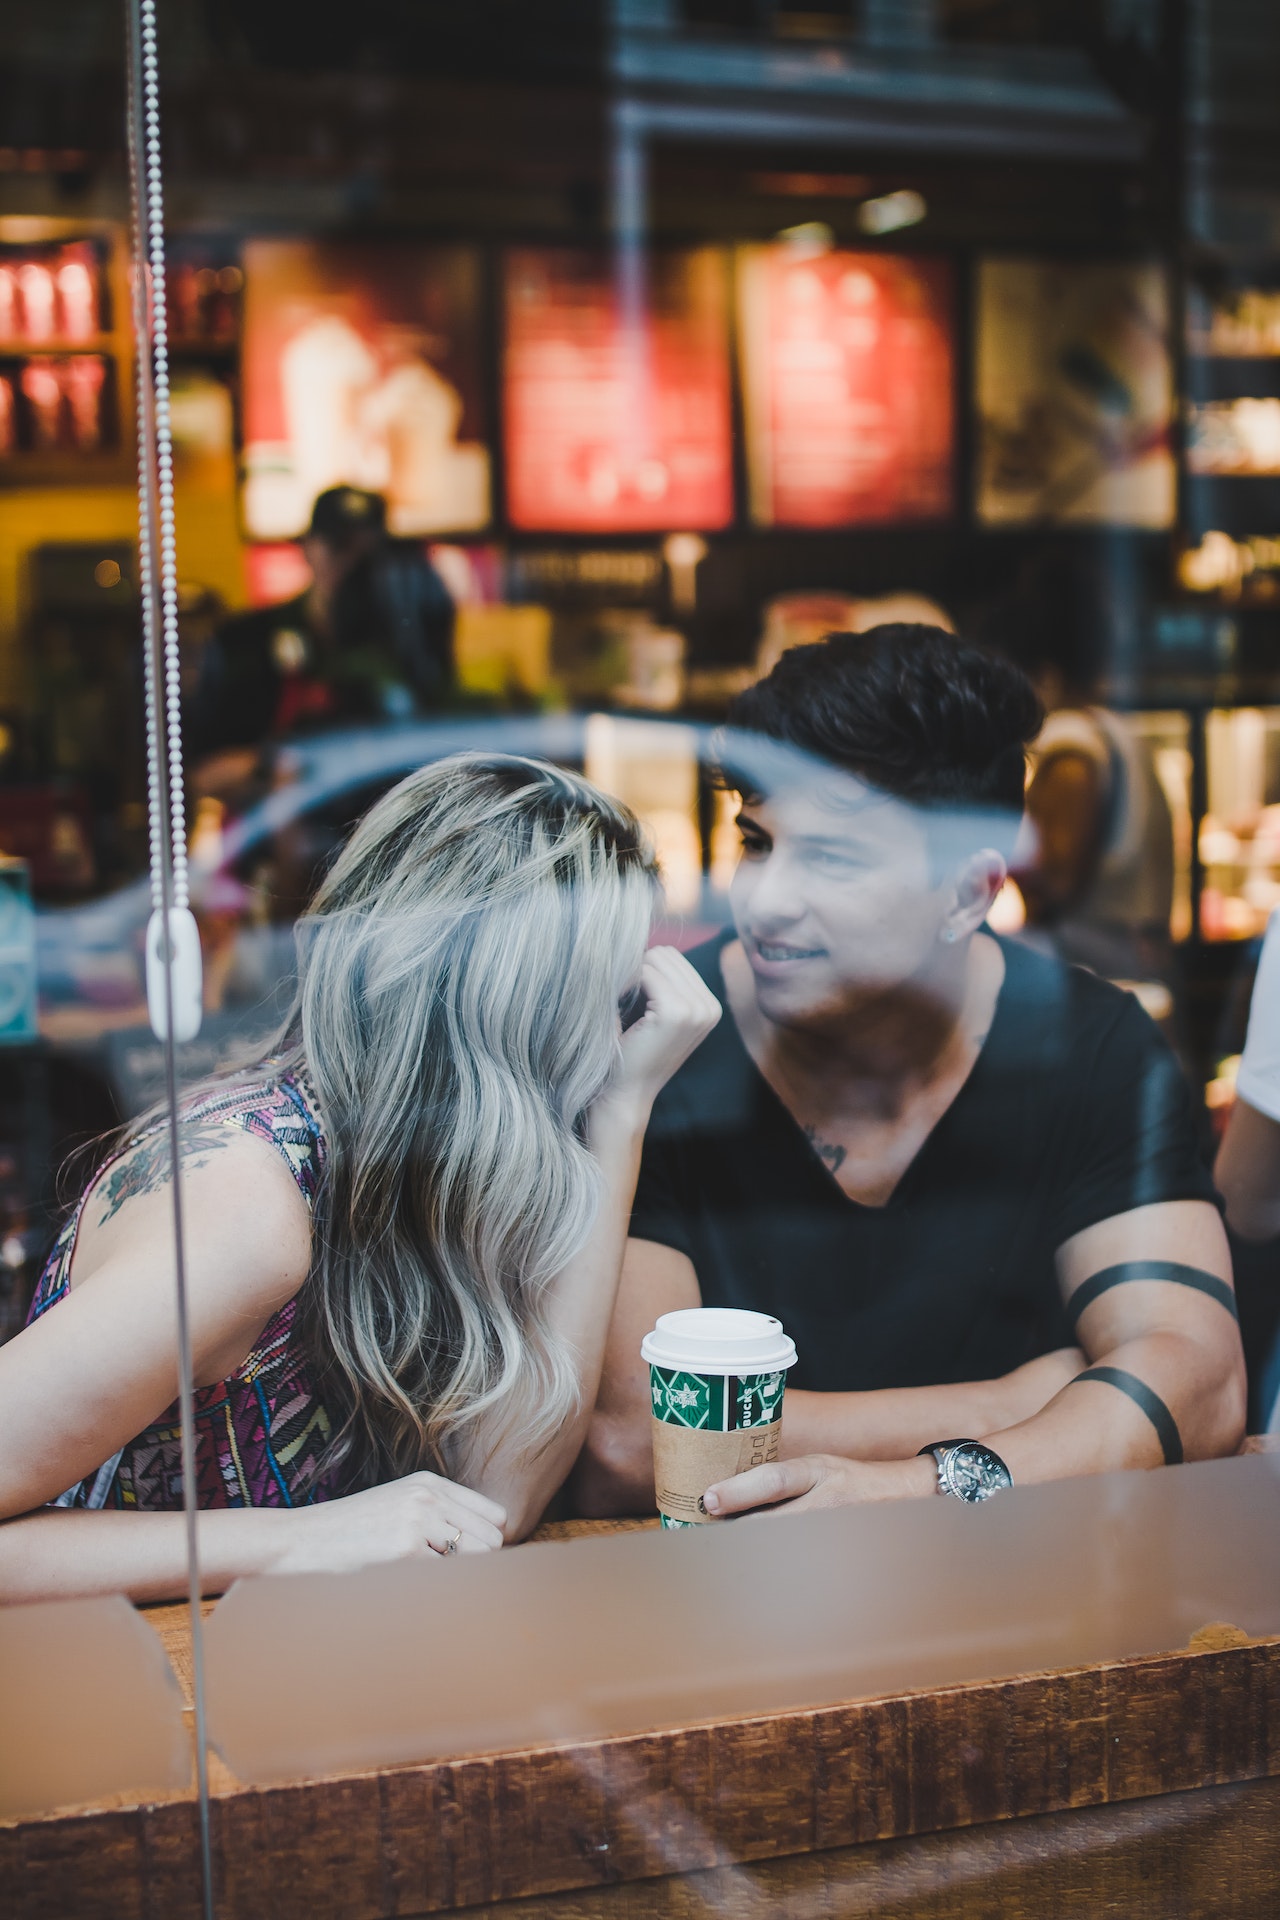 150 Deep Relationship Questions to Strengthen Your Bond